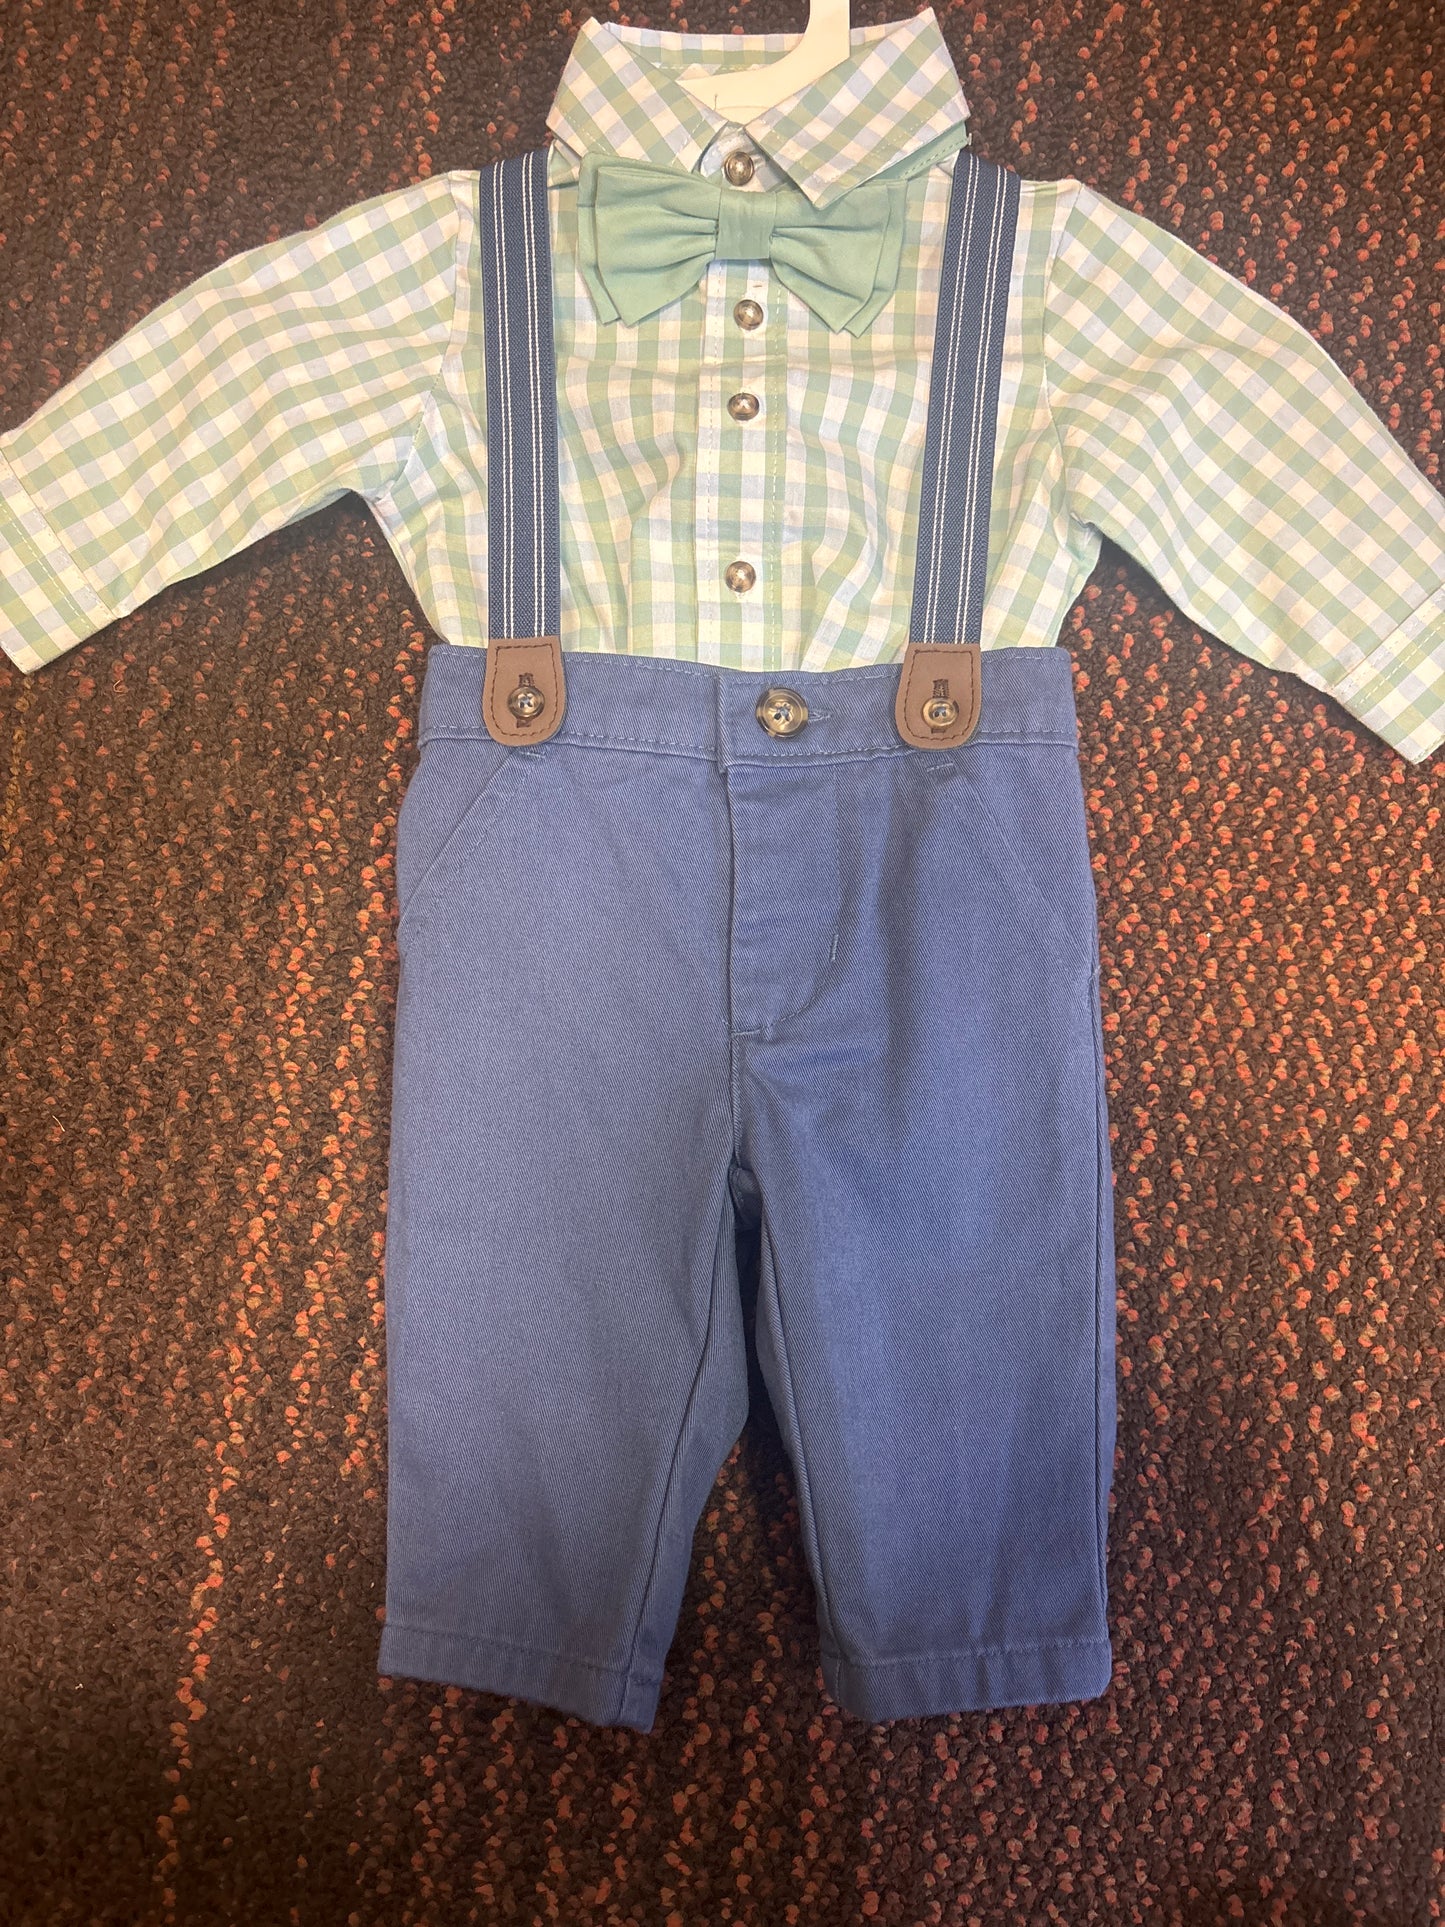 Kids Onesie and Overall Set - Green Plaid